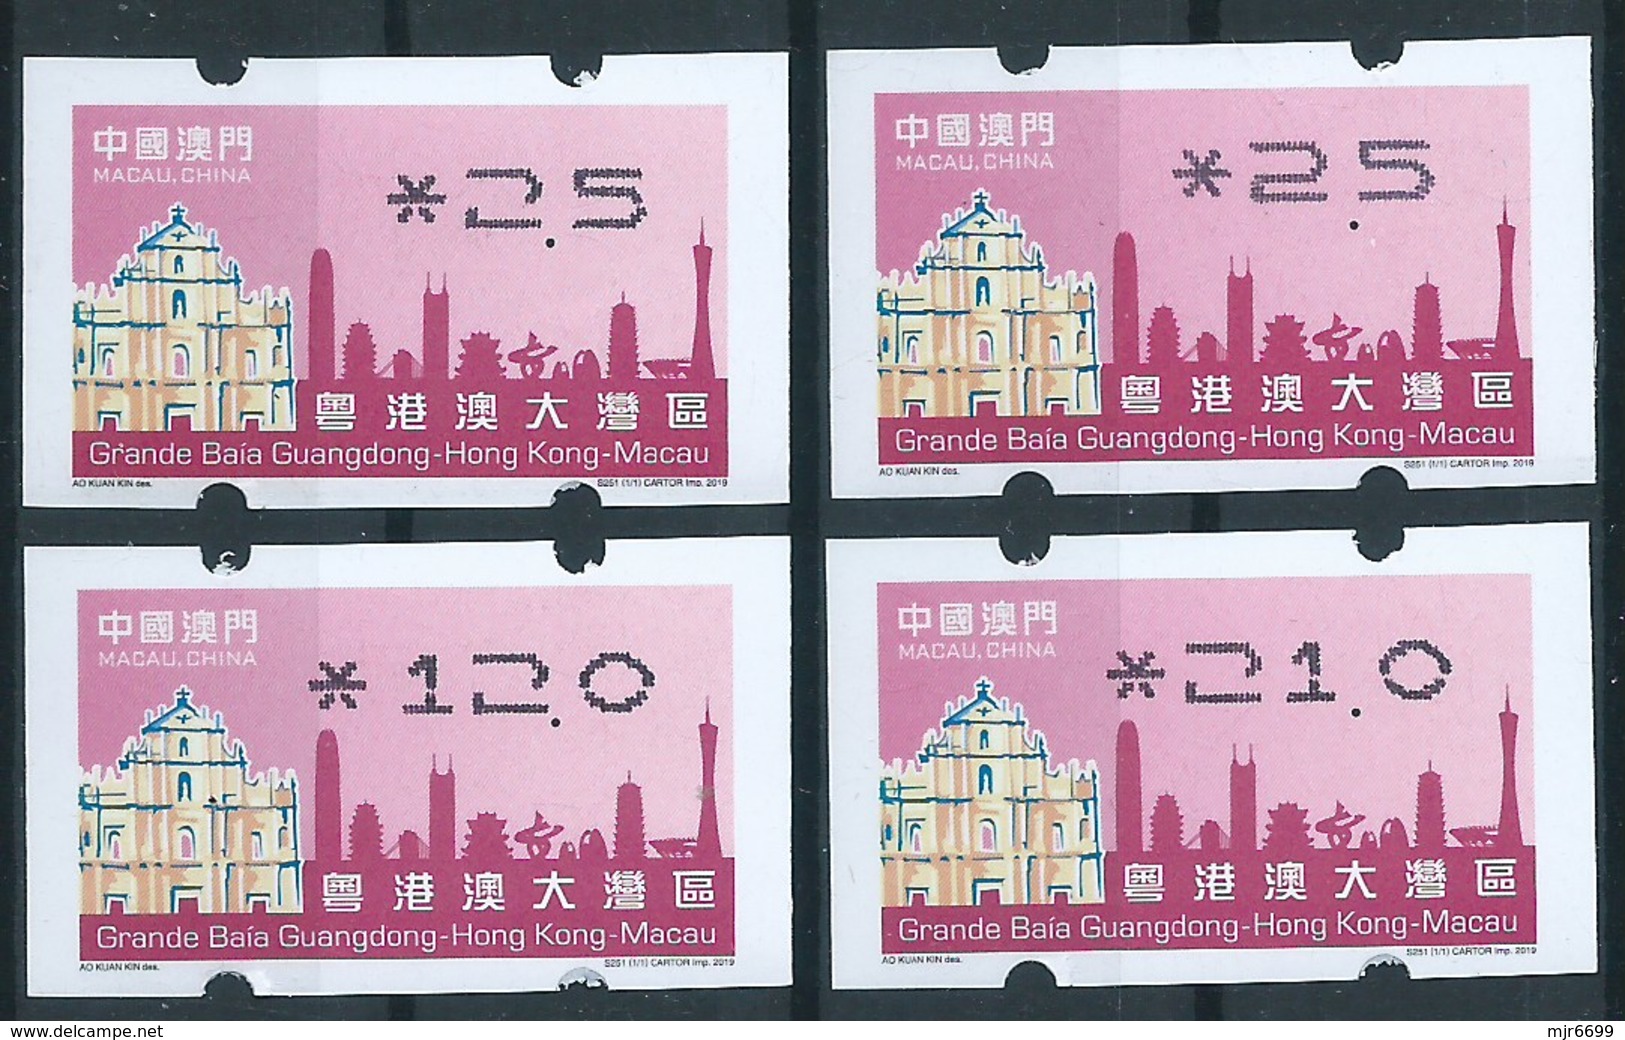 MACAU 2019 GREAT BAY ERROR PRINT ATM LABELS 2.5, 12.00 & 21.00  + 1 NORMAL FOR COMPARE - Automaten